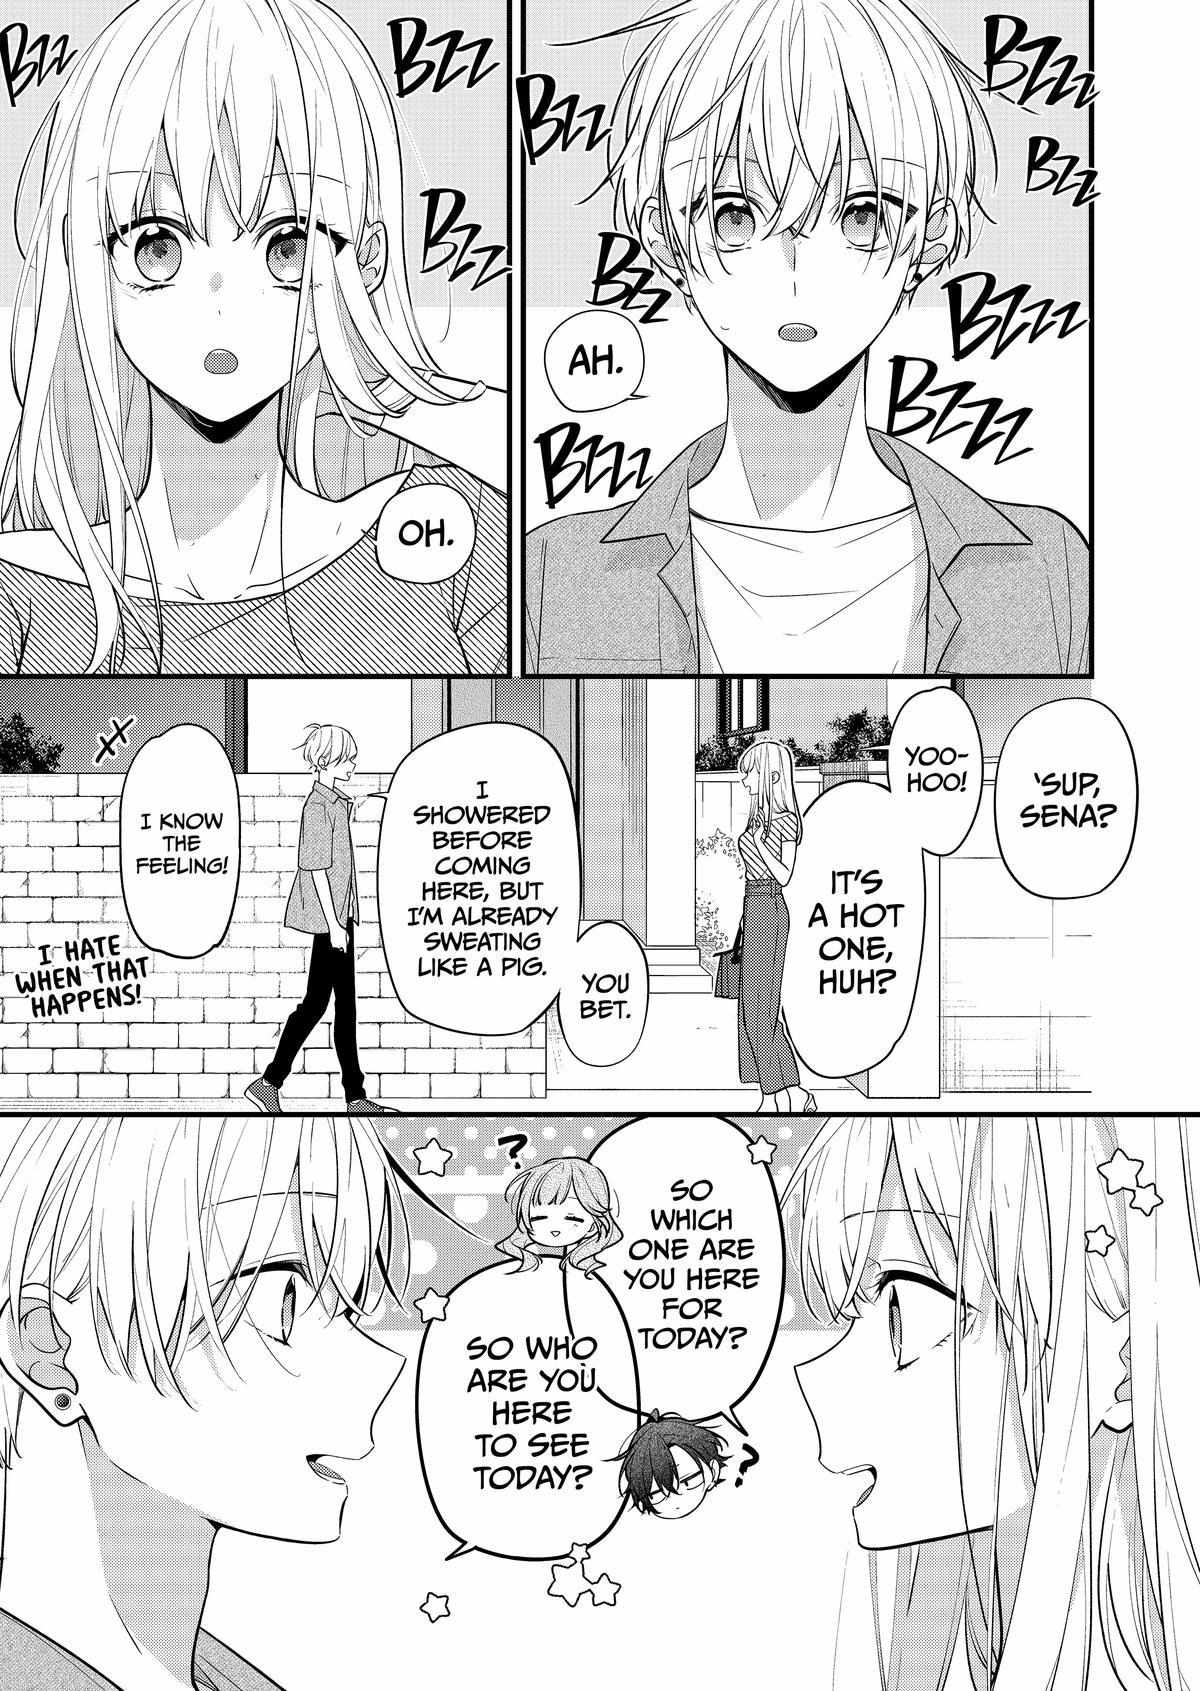 The Story Of A Guy Who Fell In Love With His Friend's Sister - 34 page 1-379f4d3c